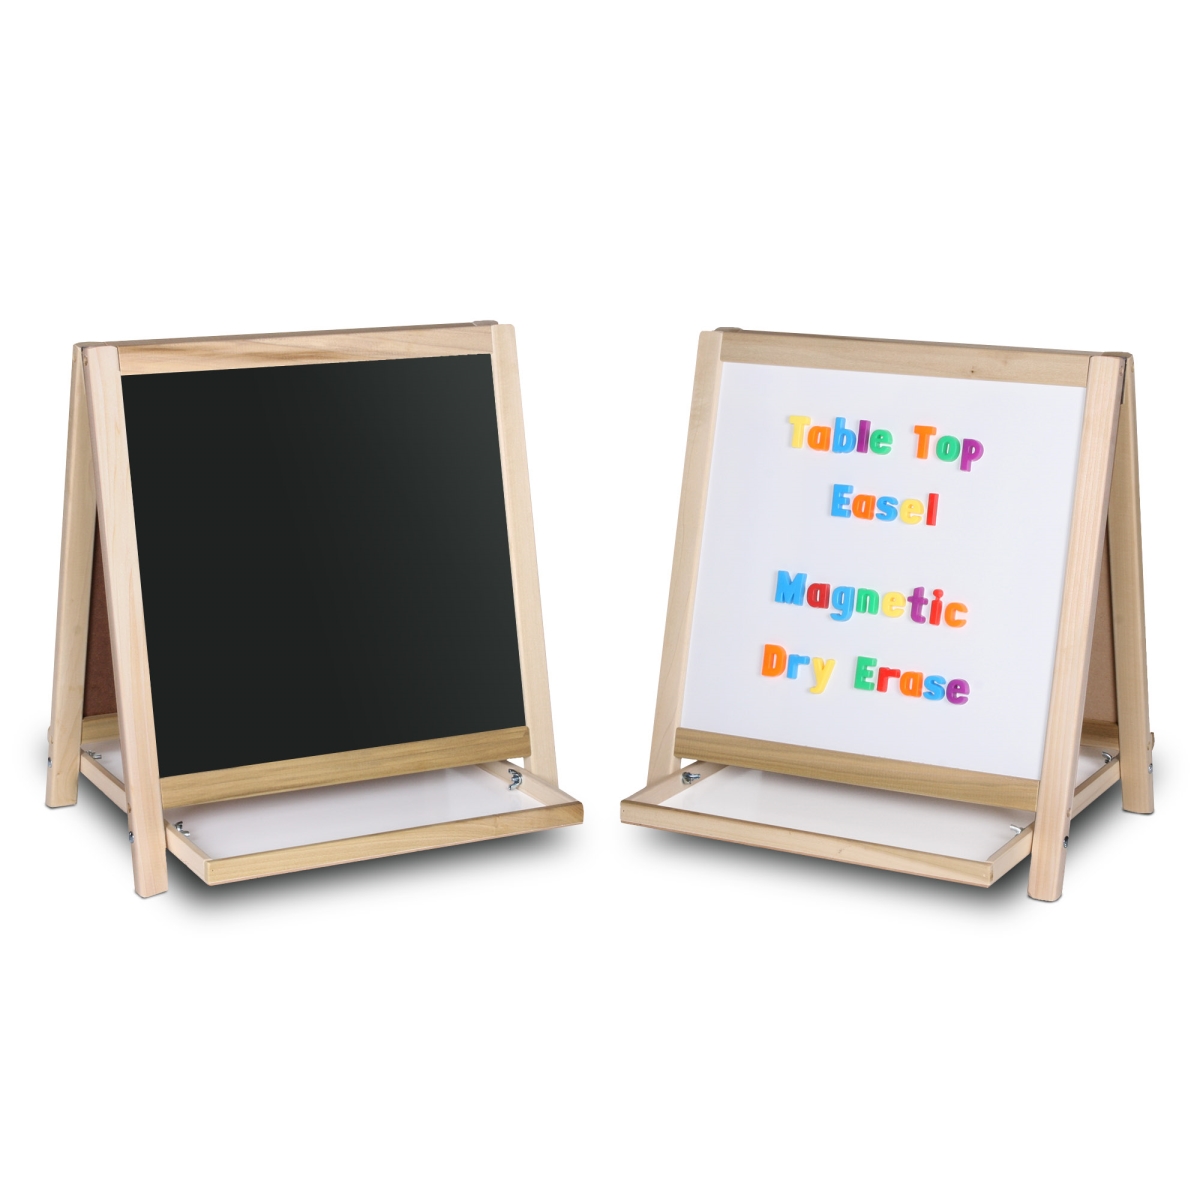 Picture of Flipside Products 17406 Magnetic Table Top Easel White Dry Erase/Black Chalkboard